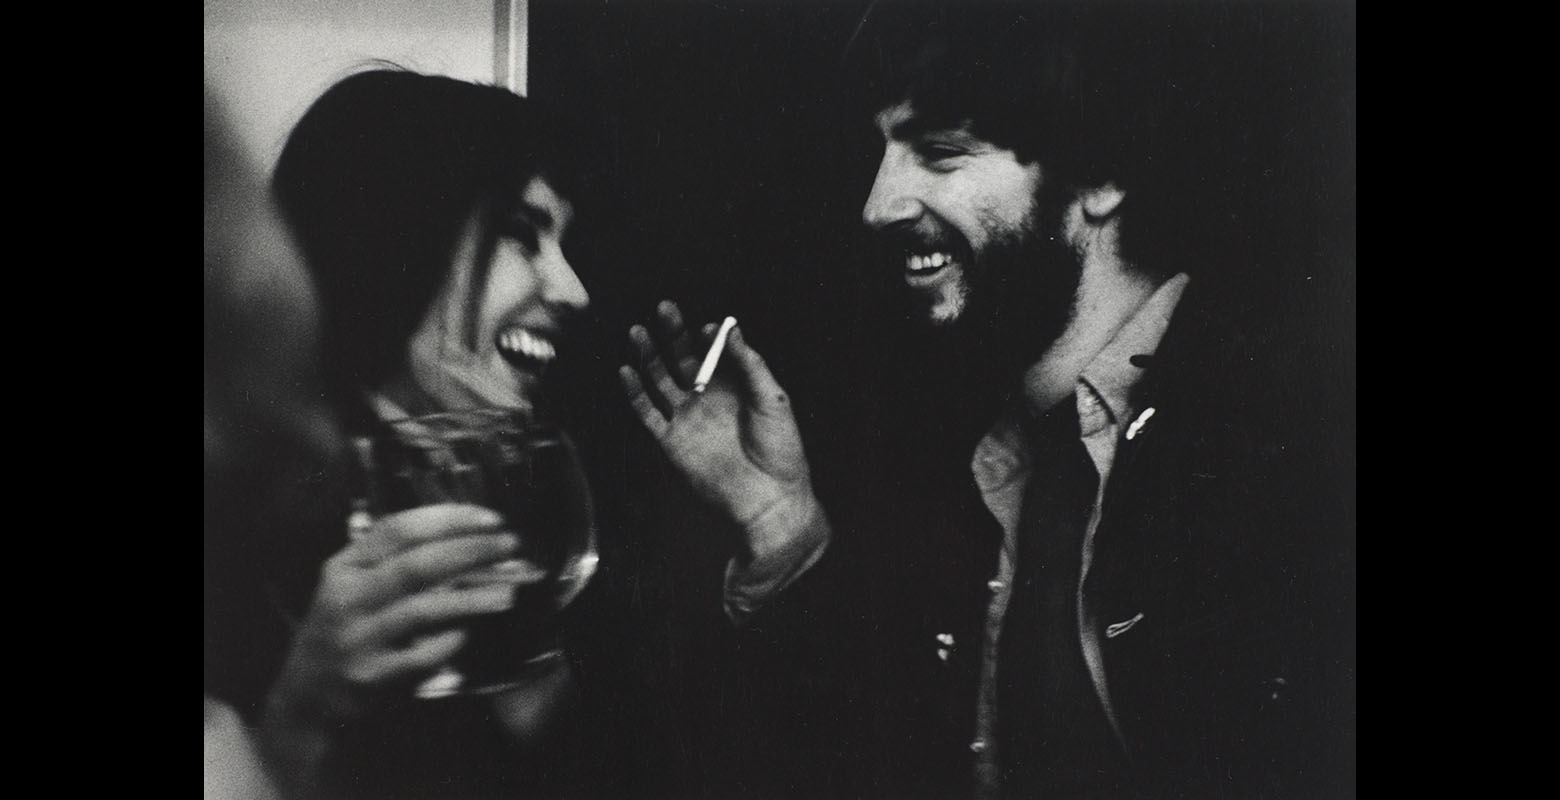 Two people laugh and smile in conversation. One is holding a glass and the other is holding a cigarette